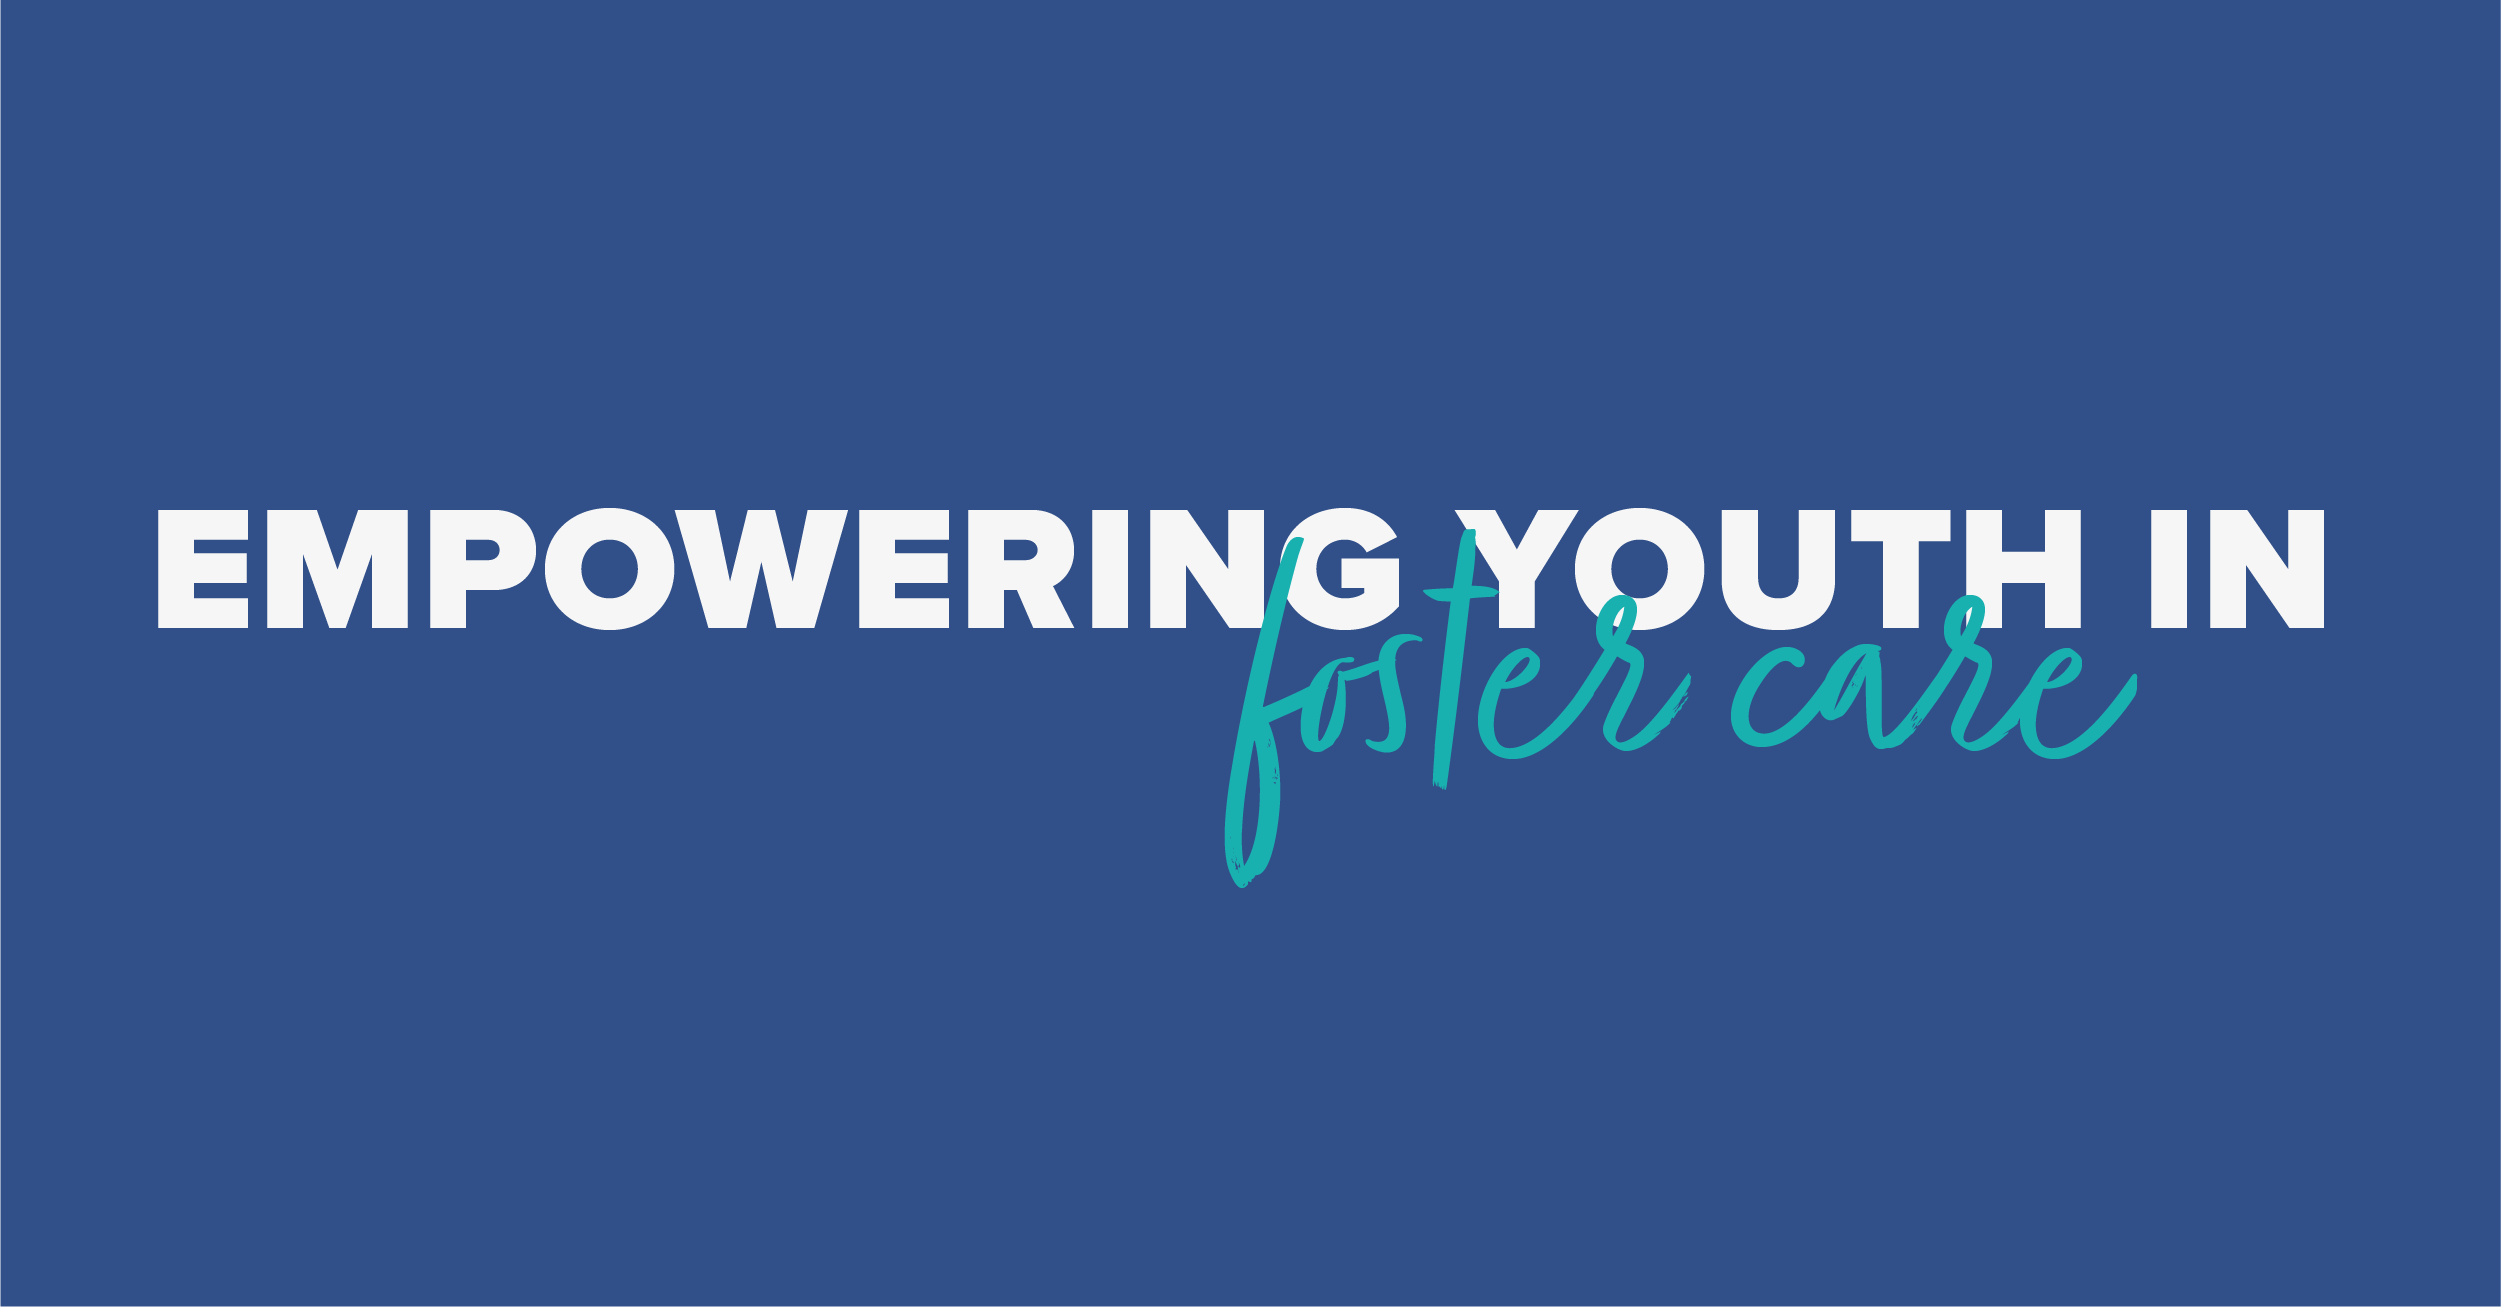 Empowering Youth in Foster Care